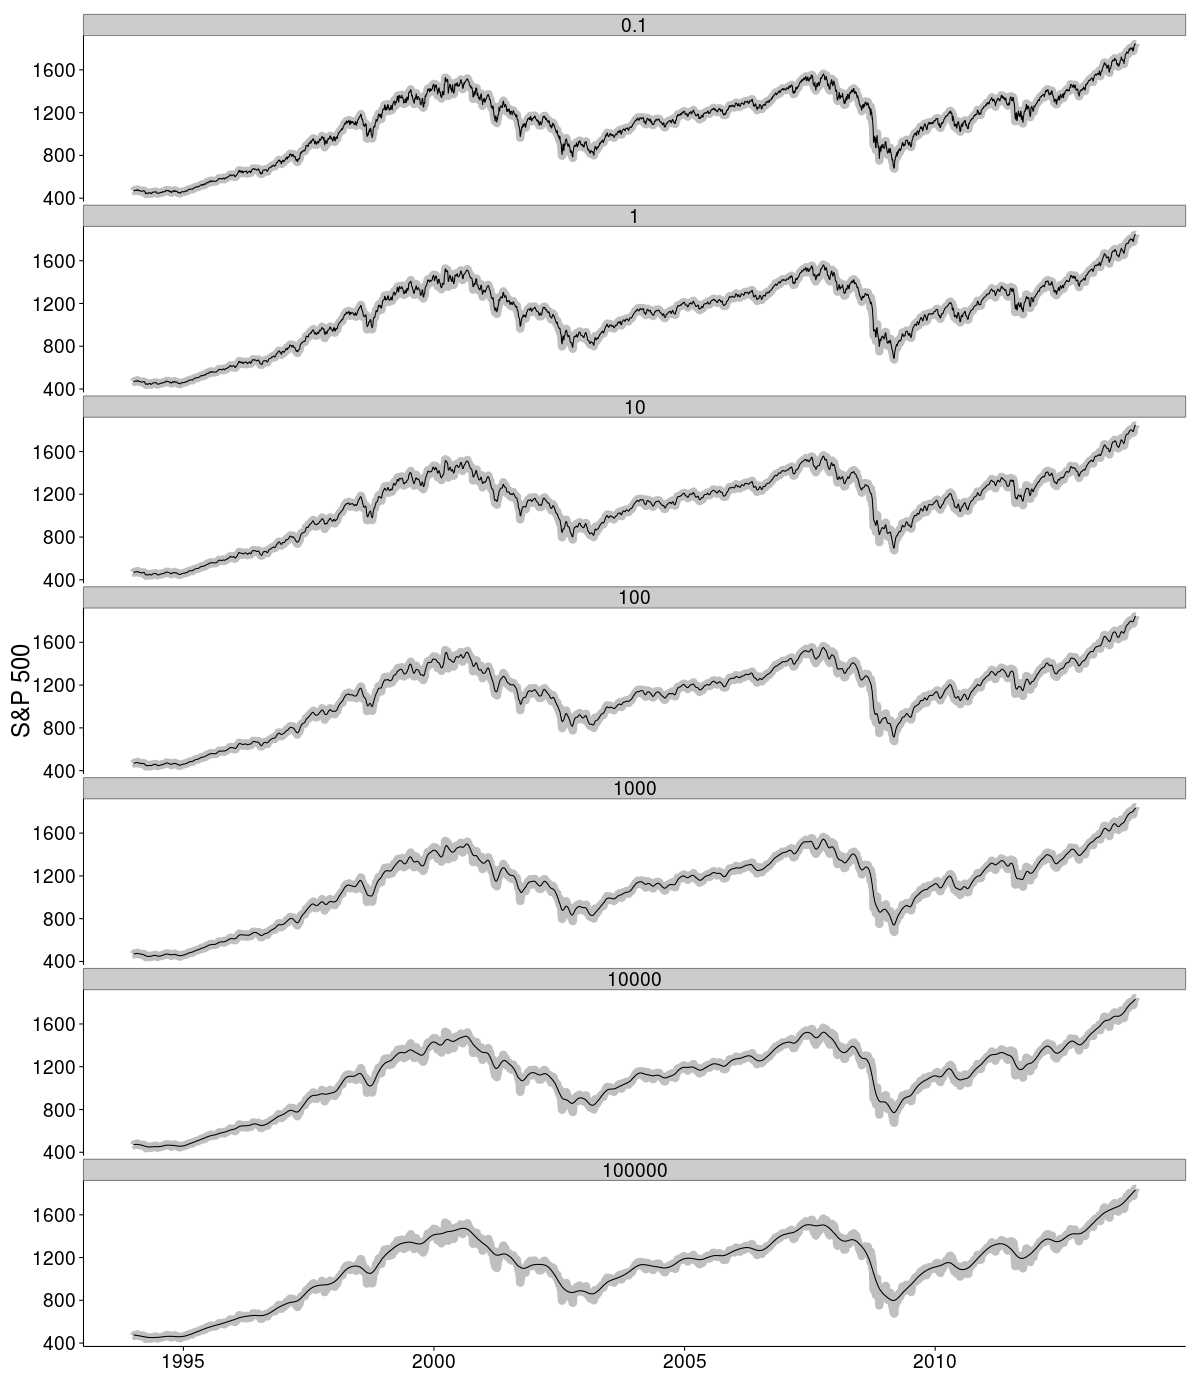 S&P 500 data smoothed using an L2 filter with various regularisation strengths.